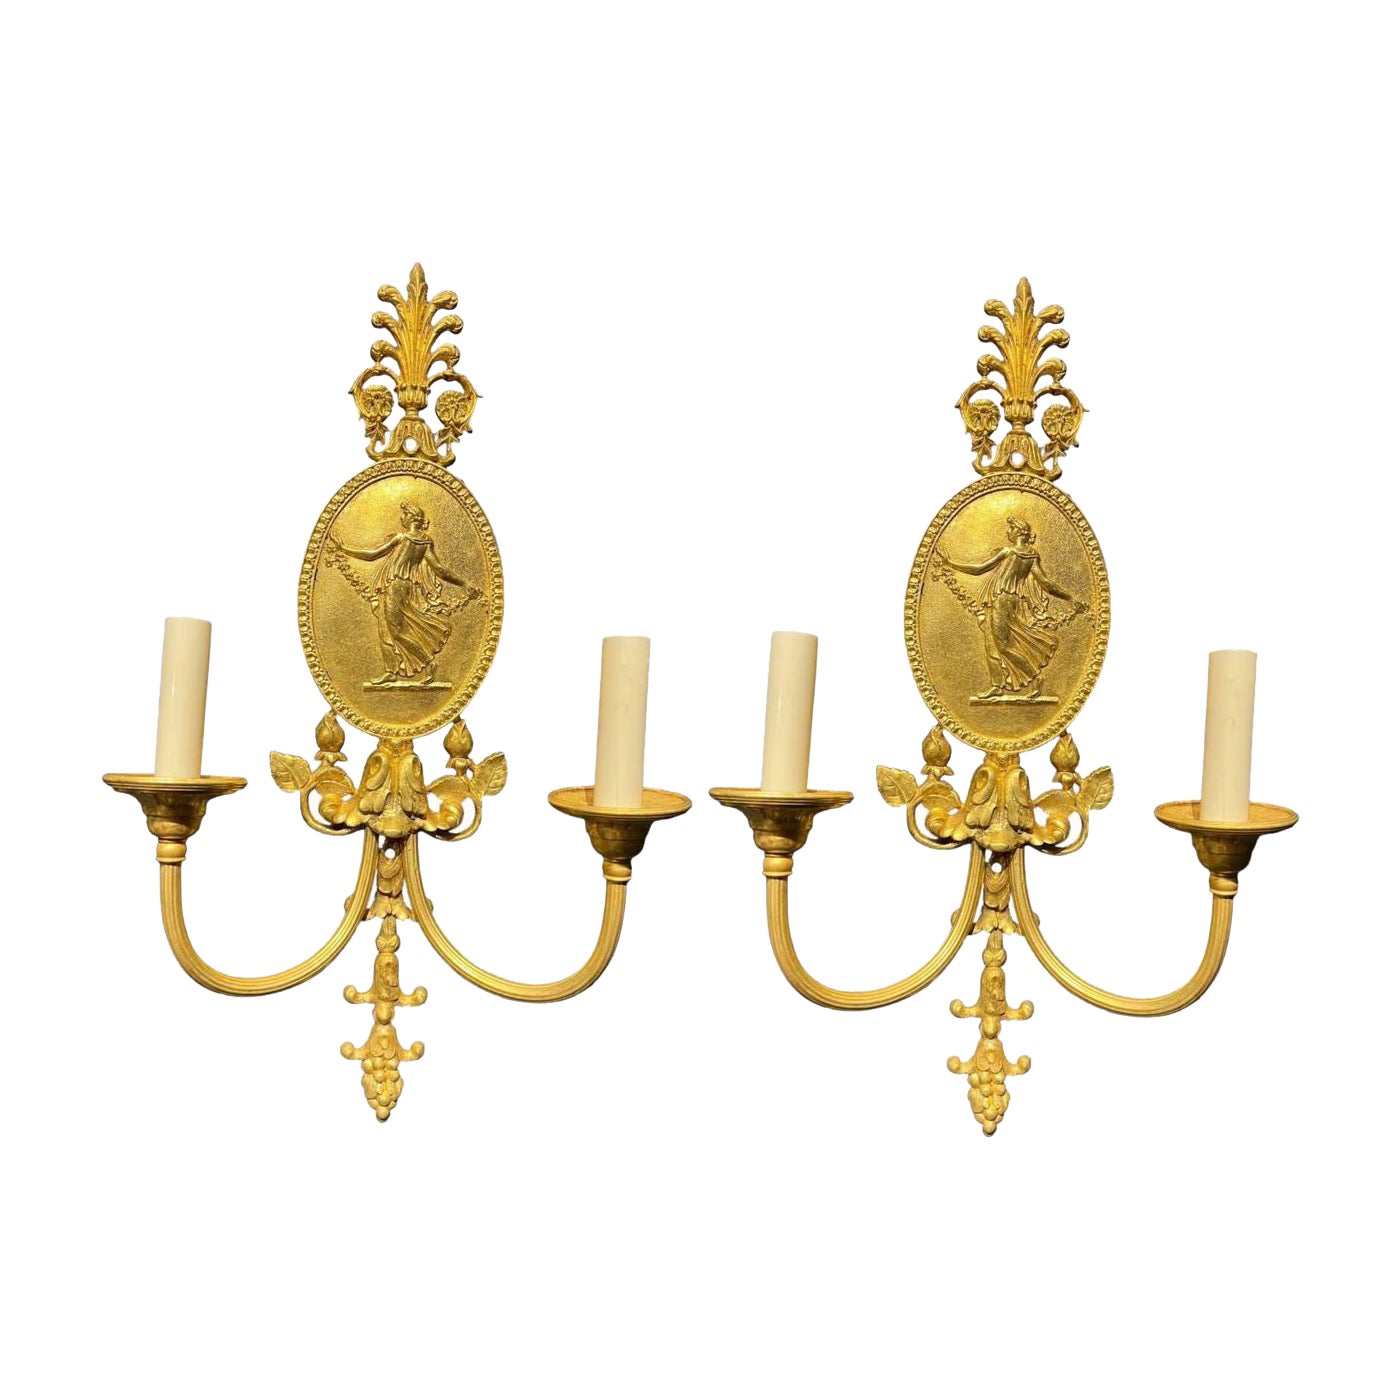 1920’s Neoclassical Style Caldwell Sconces with cameos